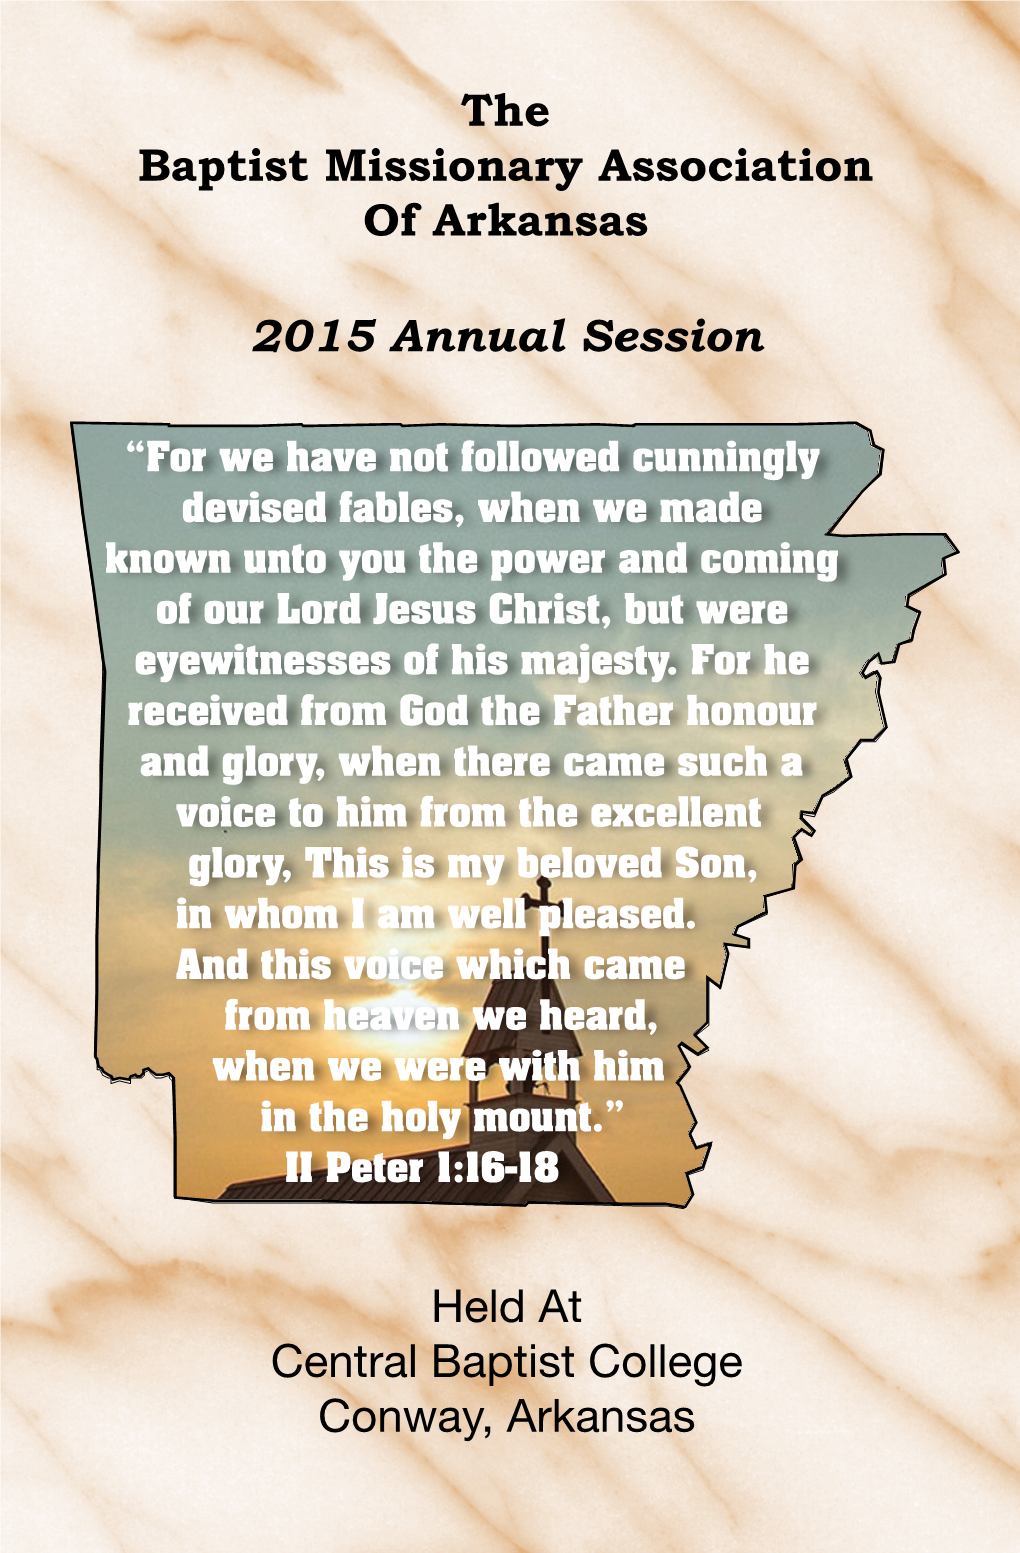 The Baptist Missionary Association of Arkansas 2015 Annual Session